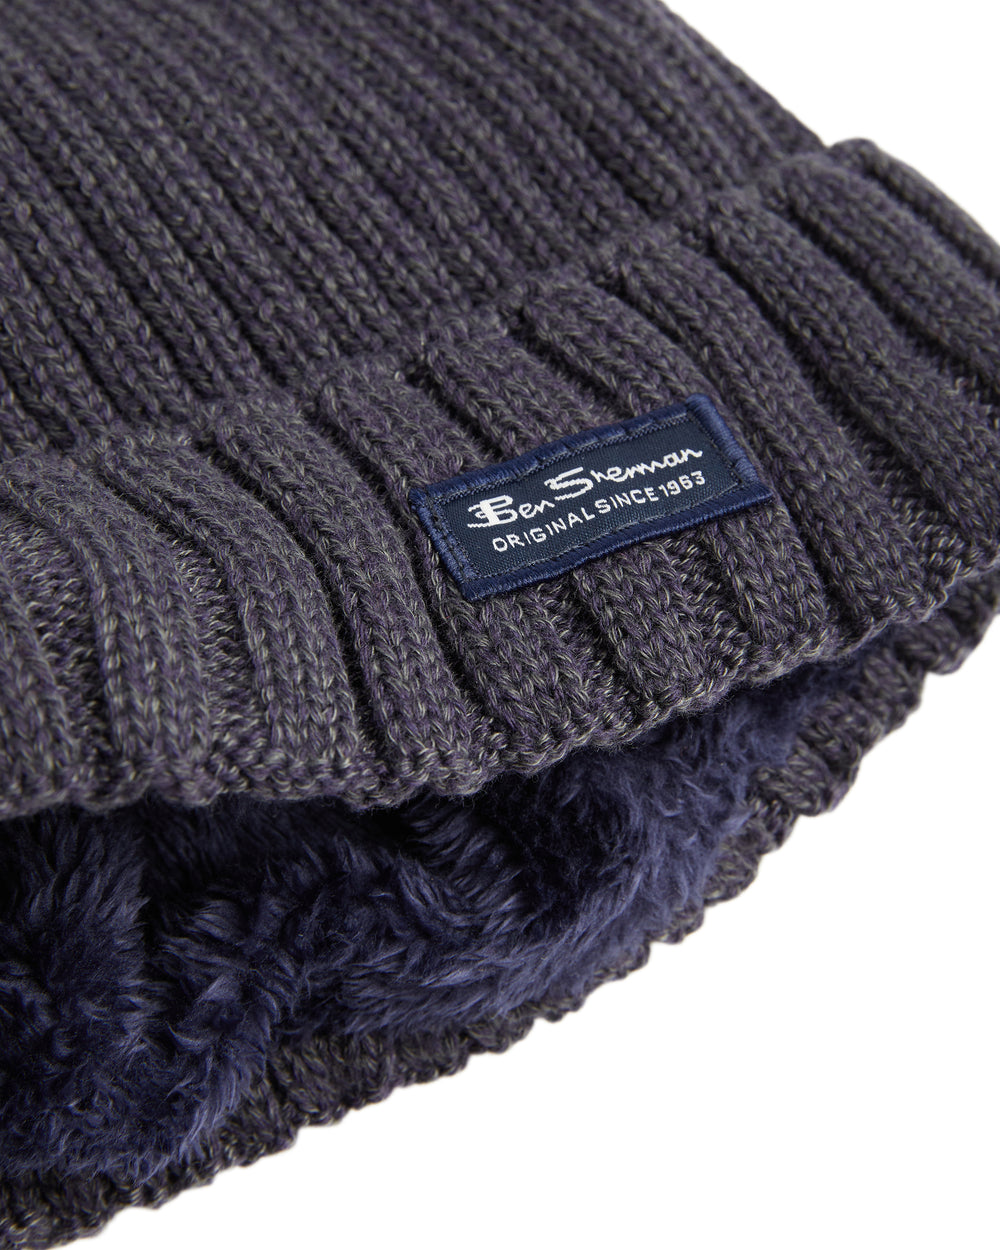 Men's Ribbed Hat with Thermal Plush Lining - Blue